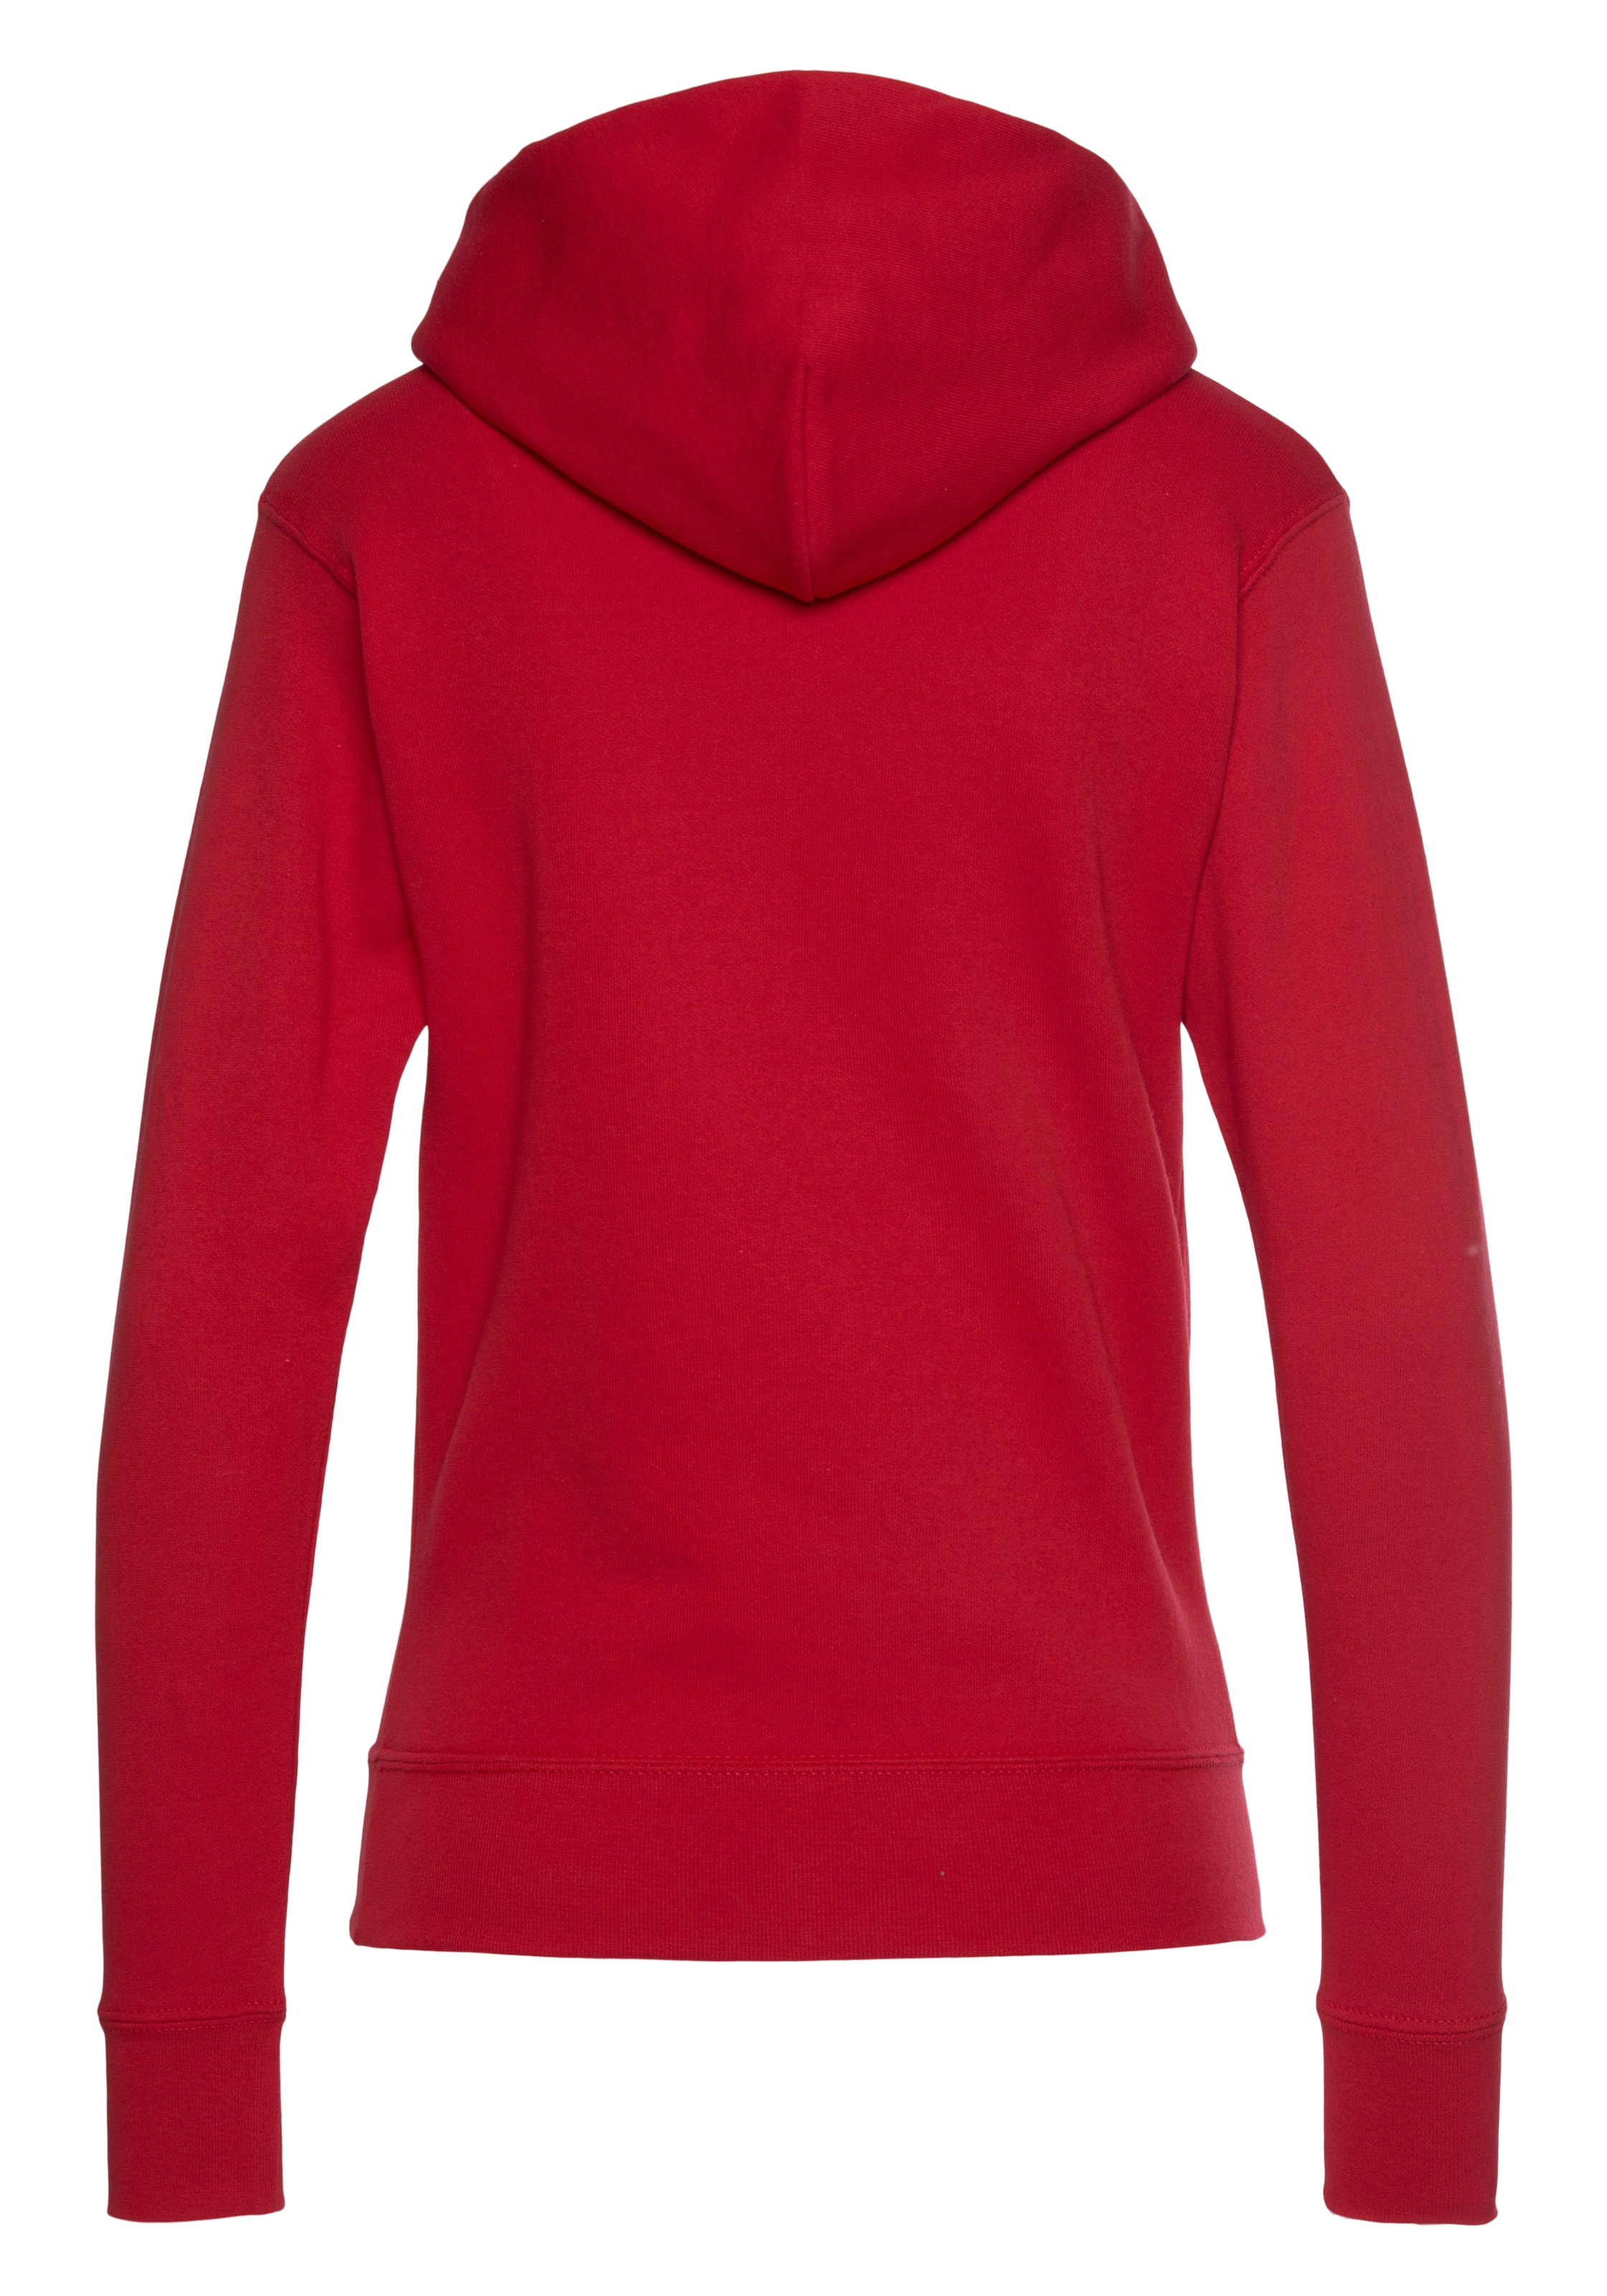 Fruit of the Loom hooded bei Lady-Fit« Sweatshirt »Classic Sweat OTTOversand